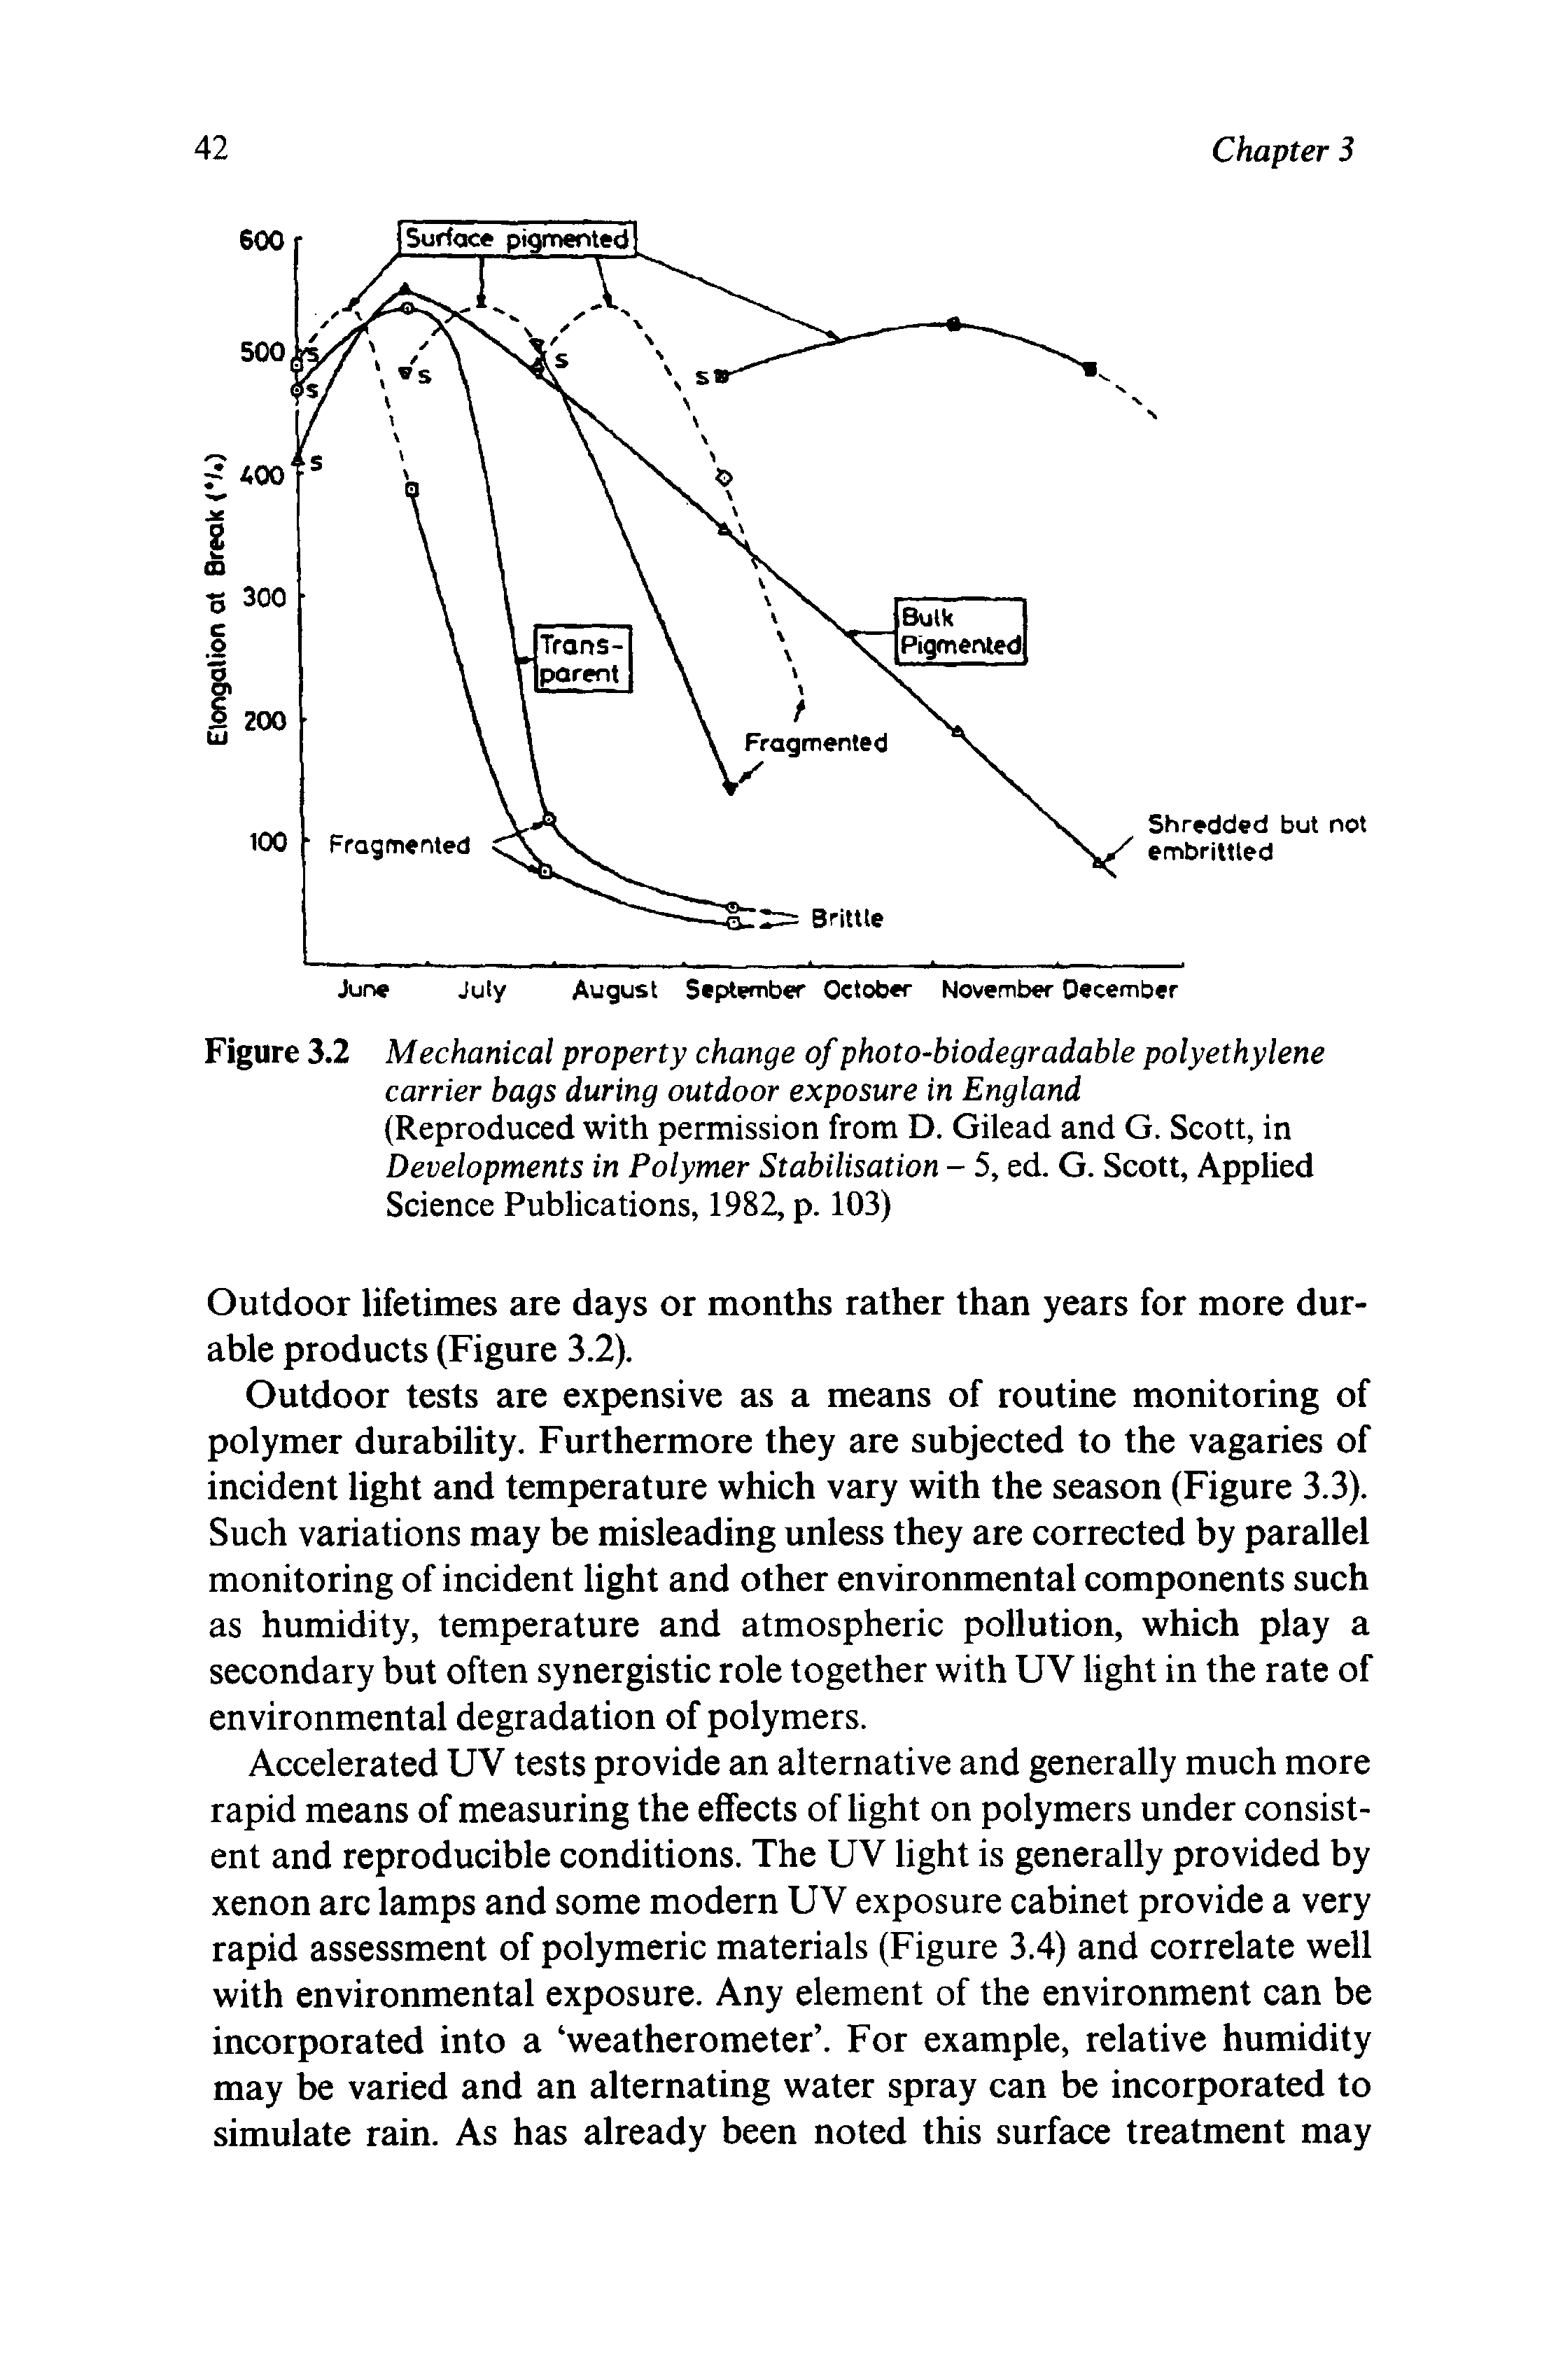 Figure 3.2 Mechanical property change of photo-biodegradable polyethylene carrier bags during outdoor exposure in England (Reproduced with permission from D. Gilead and G. Scott, in Developments in Polymer Stabilisation - 5, ed. G. Scott, Applied Science Publications, 1982, p. 103)...